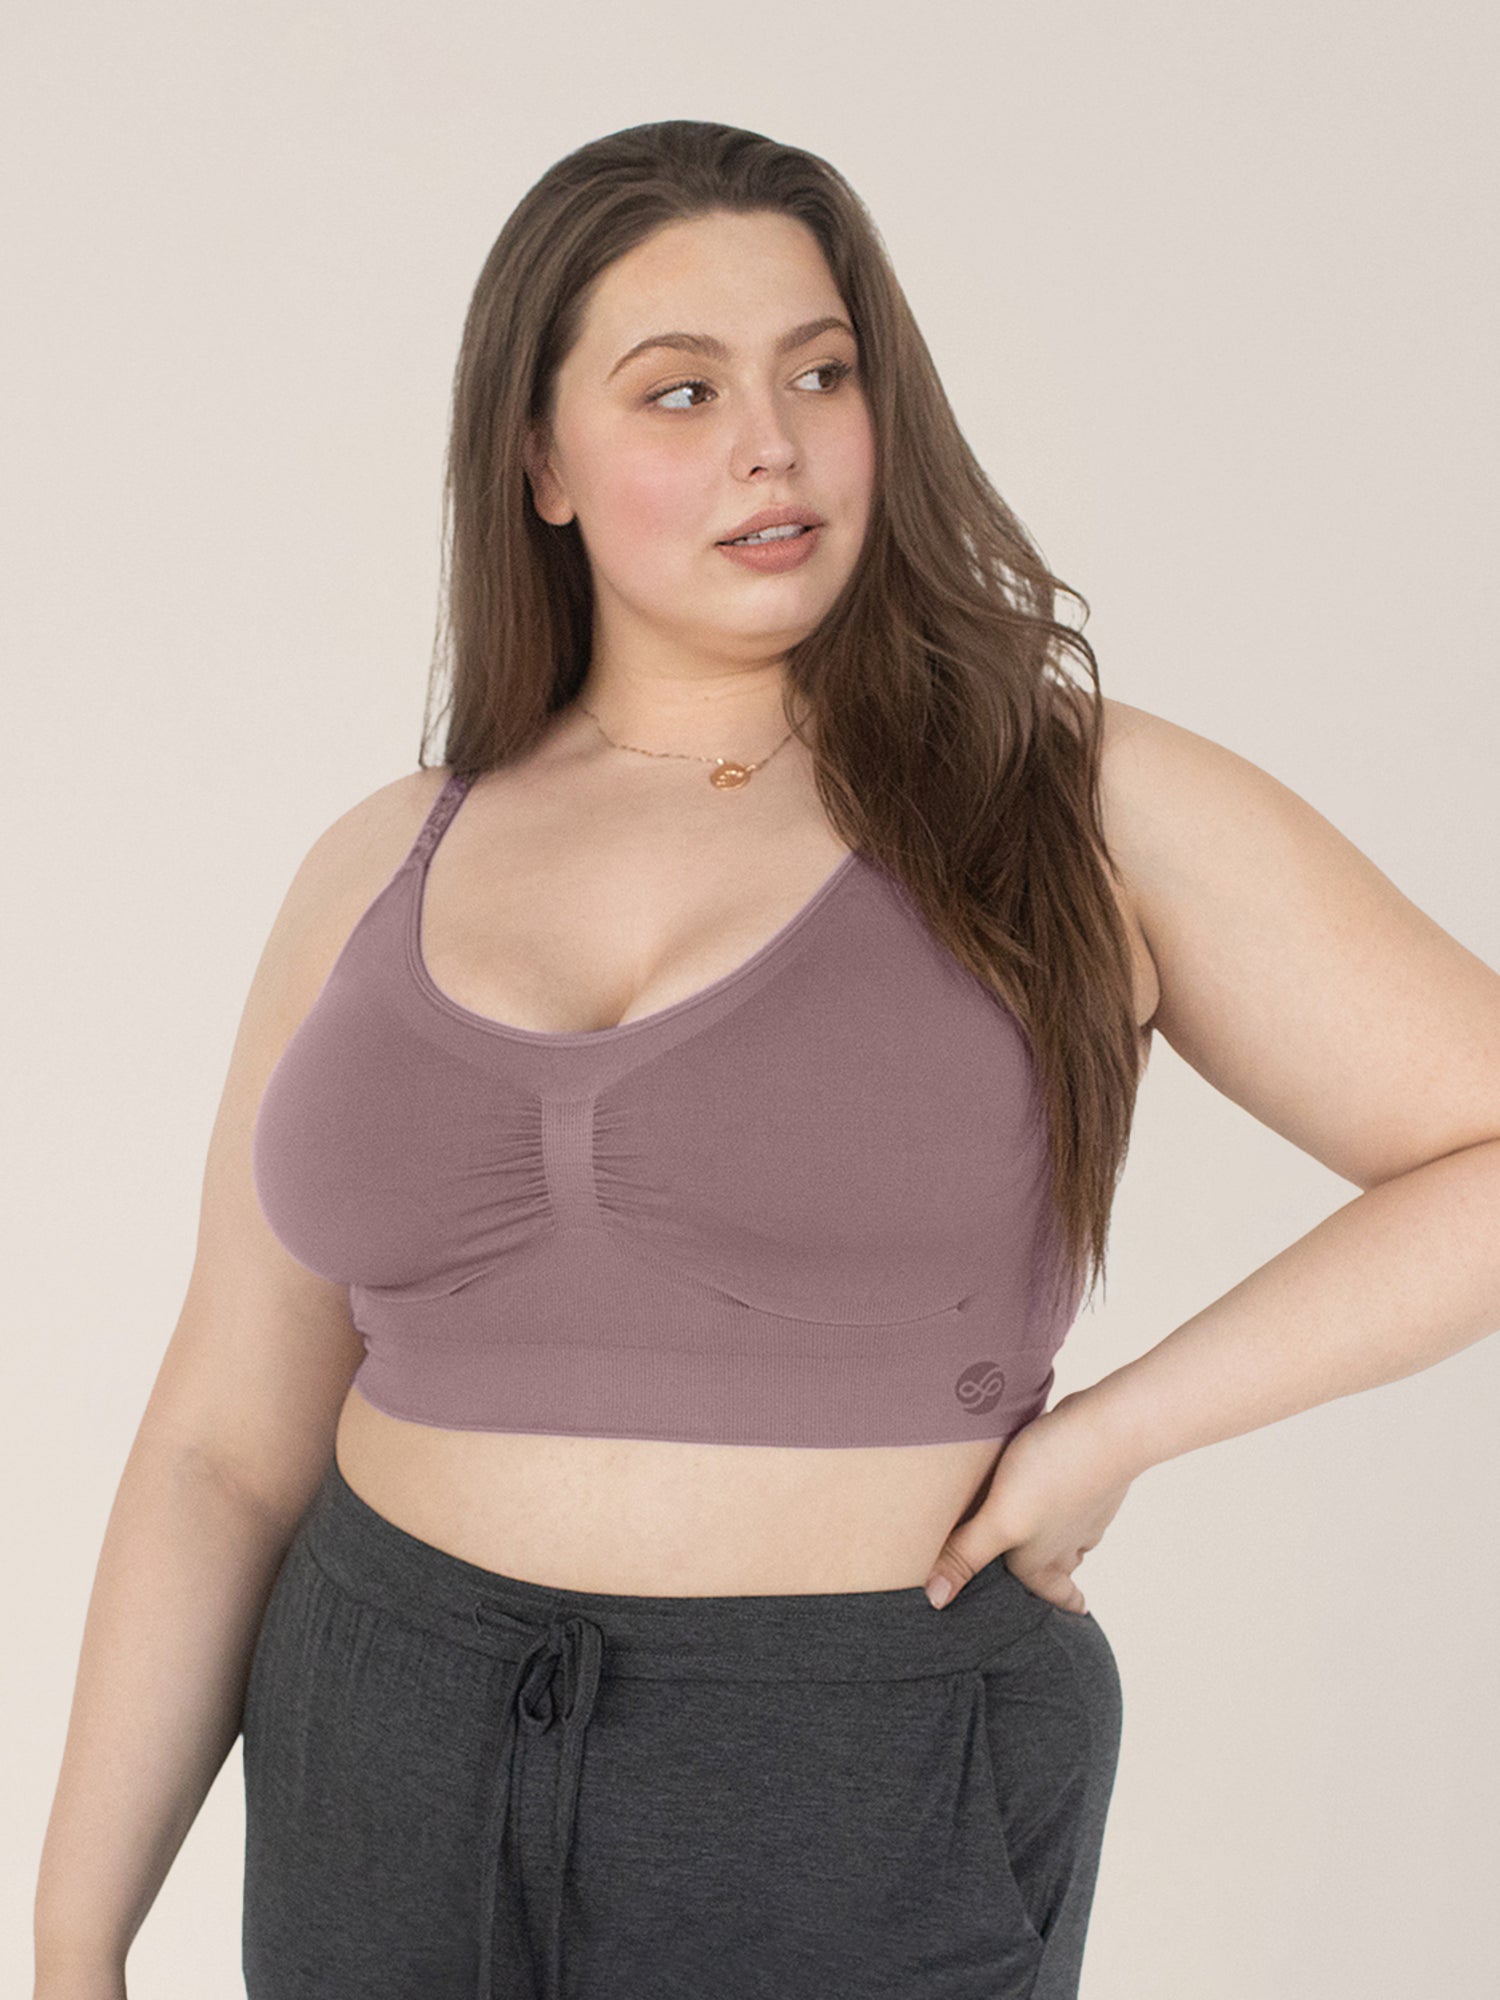 Finally, A Sports Bra Line Featuring Non-Tiny Models